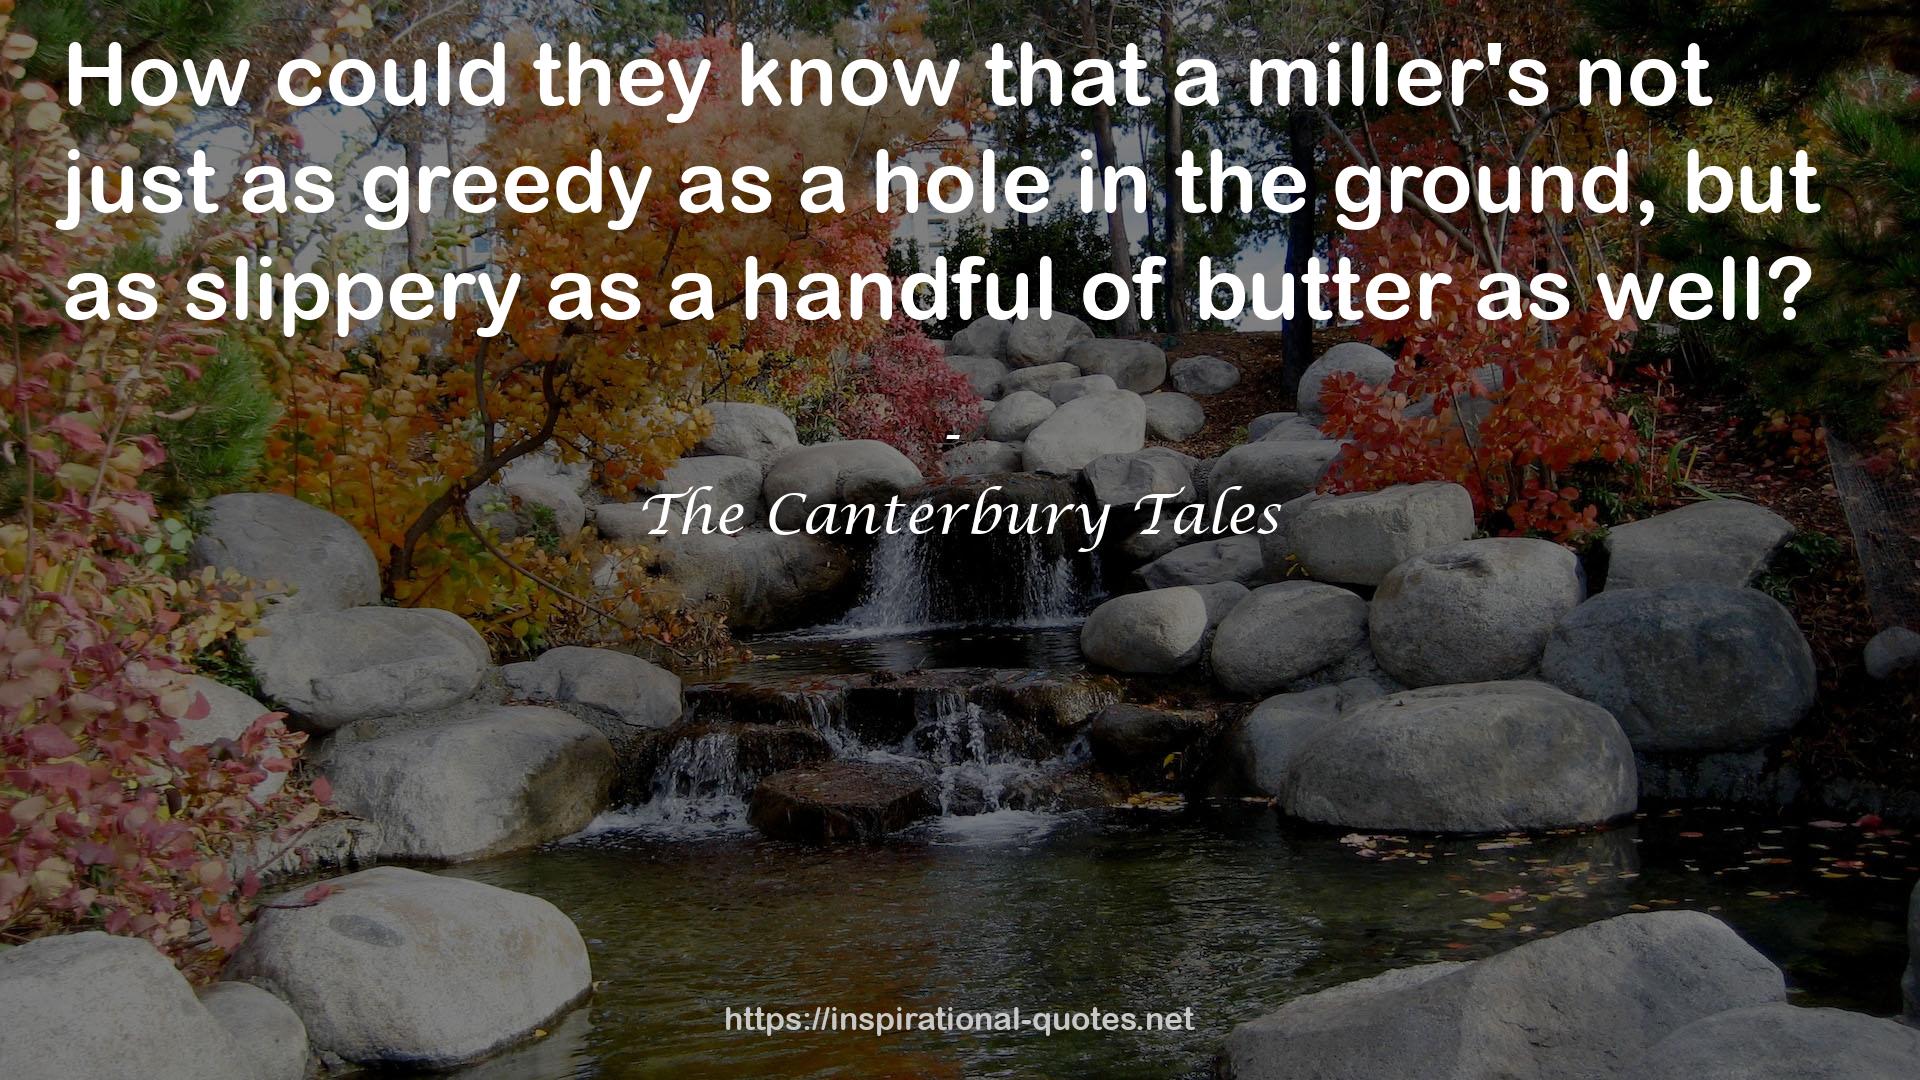 The Canterbury Tales QUOTES